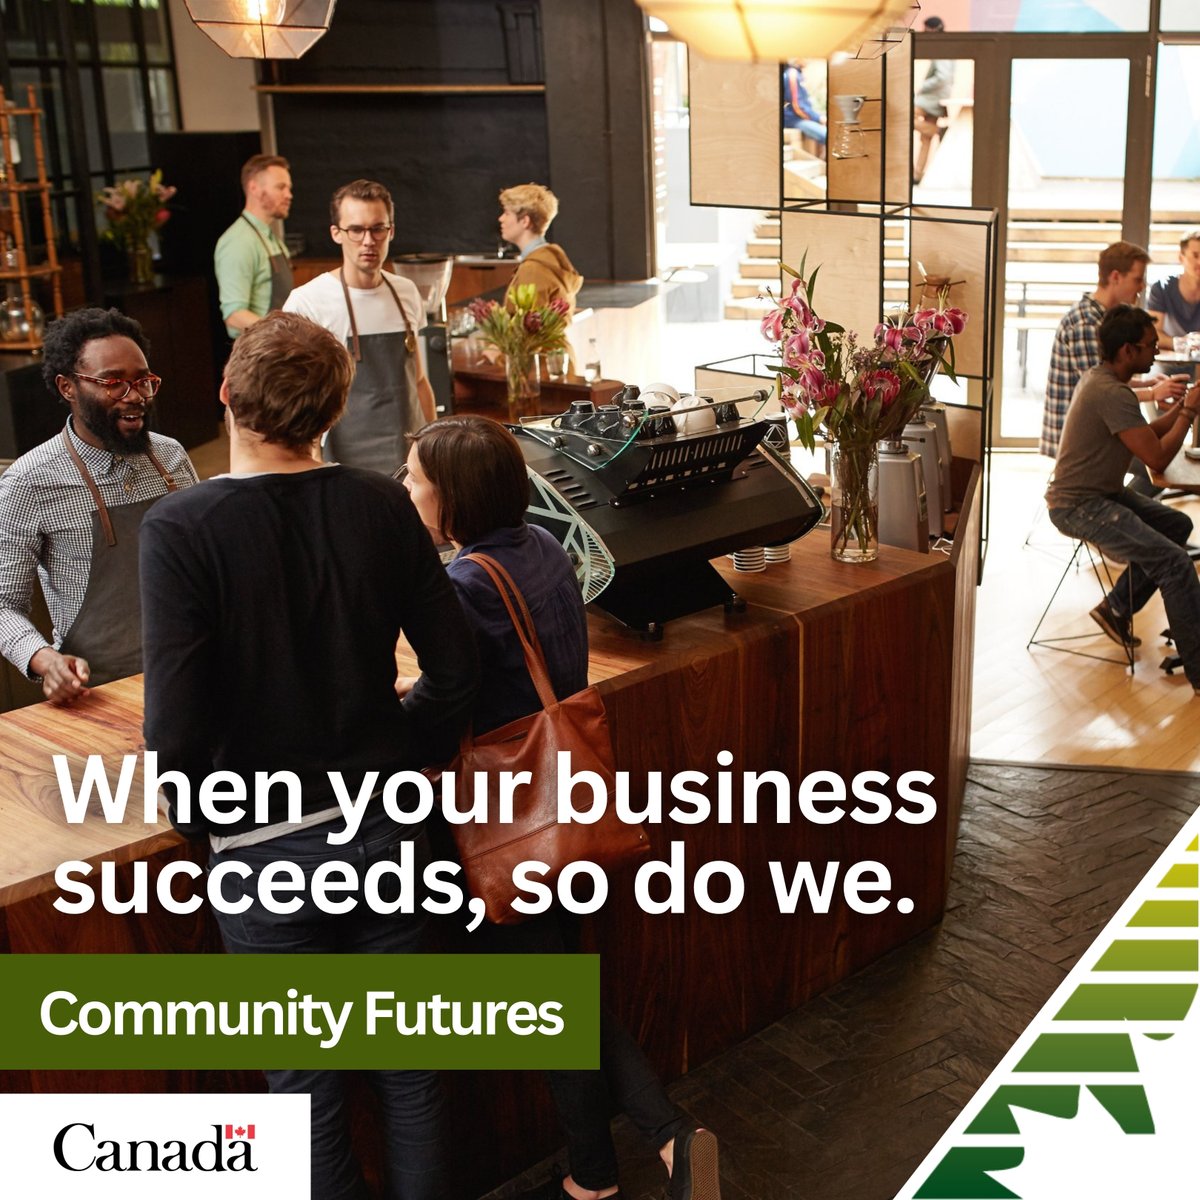 At CF Ontario, we are proud to support the businesses and organizations that make up our community. Visit cfontario.ca to learn how we can grow together. Funded by #GoC through @FedDevOntario and FedNor.